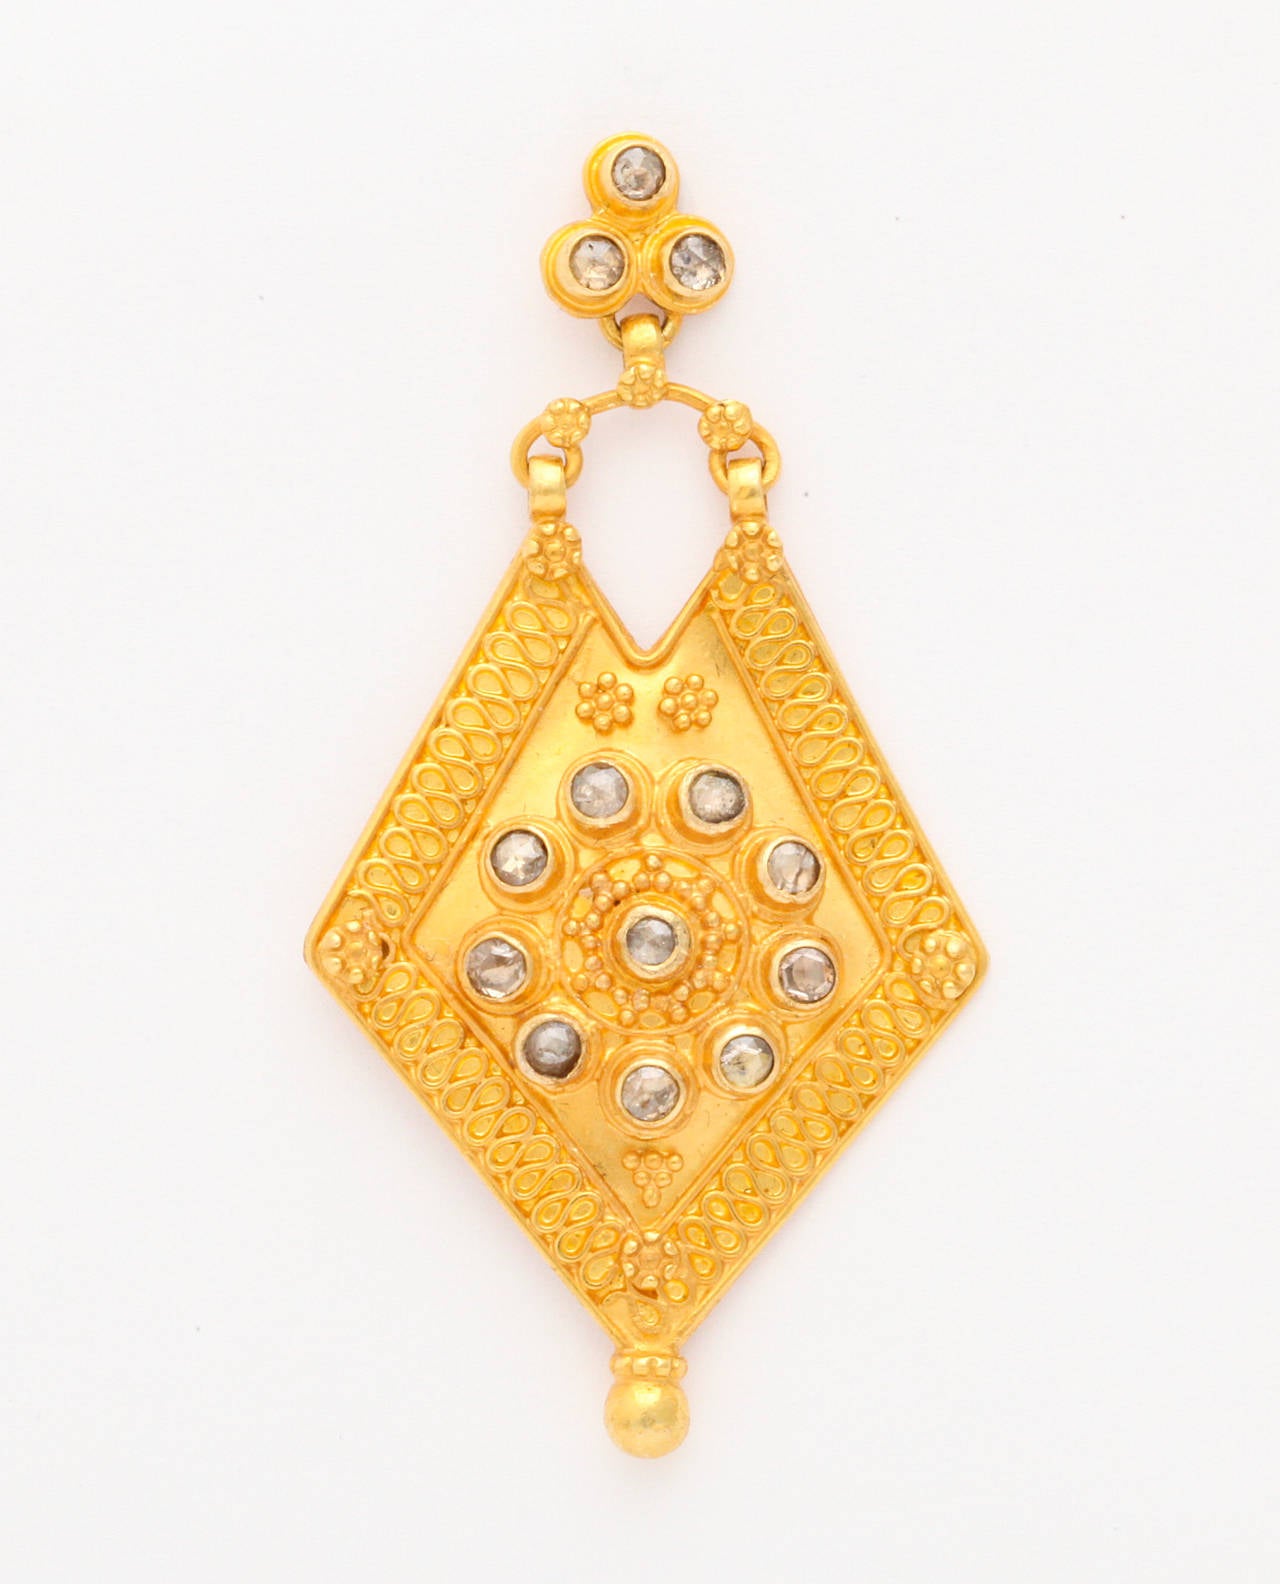 A pair of 18kt yellow gold and rose cut diamond shield earrings. There are approximately 1.30cts of diamonds.
Height: 2 inches
width: 1:00 inch